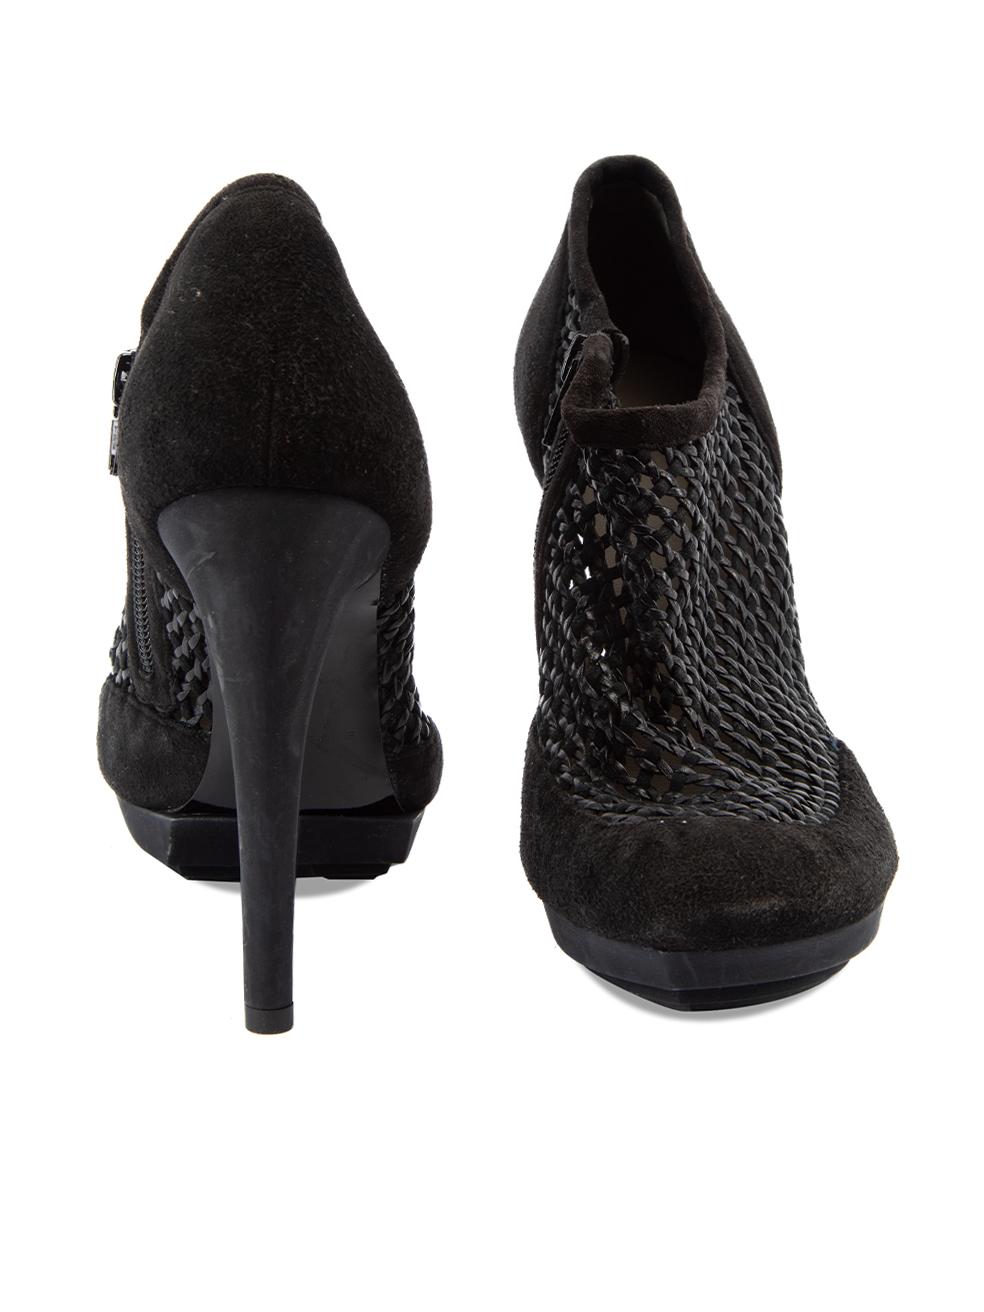 Pre-Loved Balenciaga Women's Black Leather Woven Platform Booties In Good Condition In London, GB